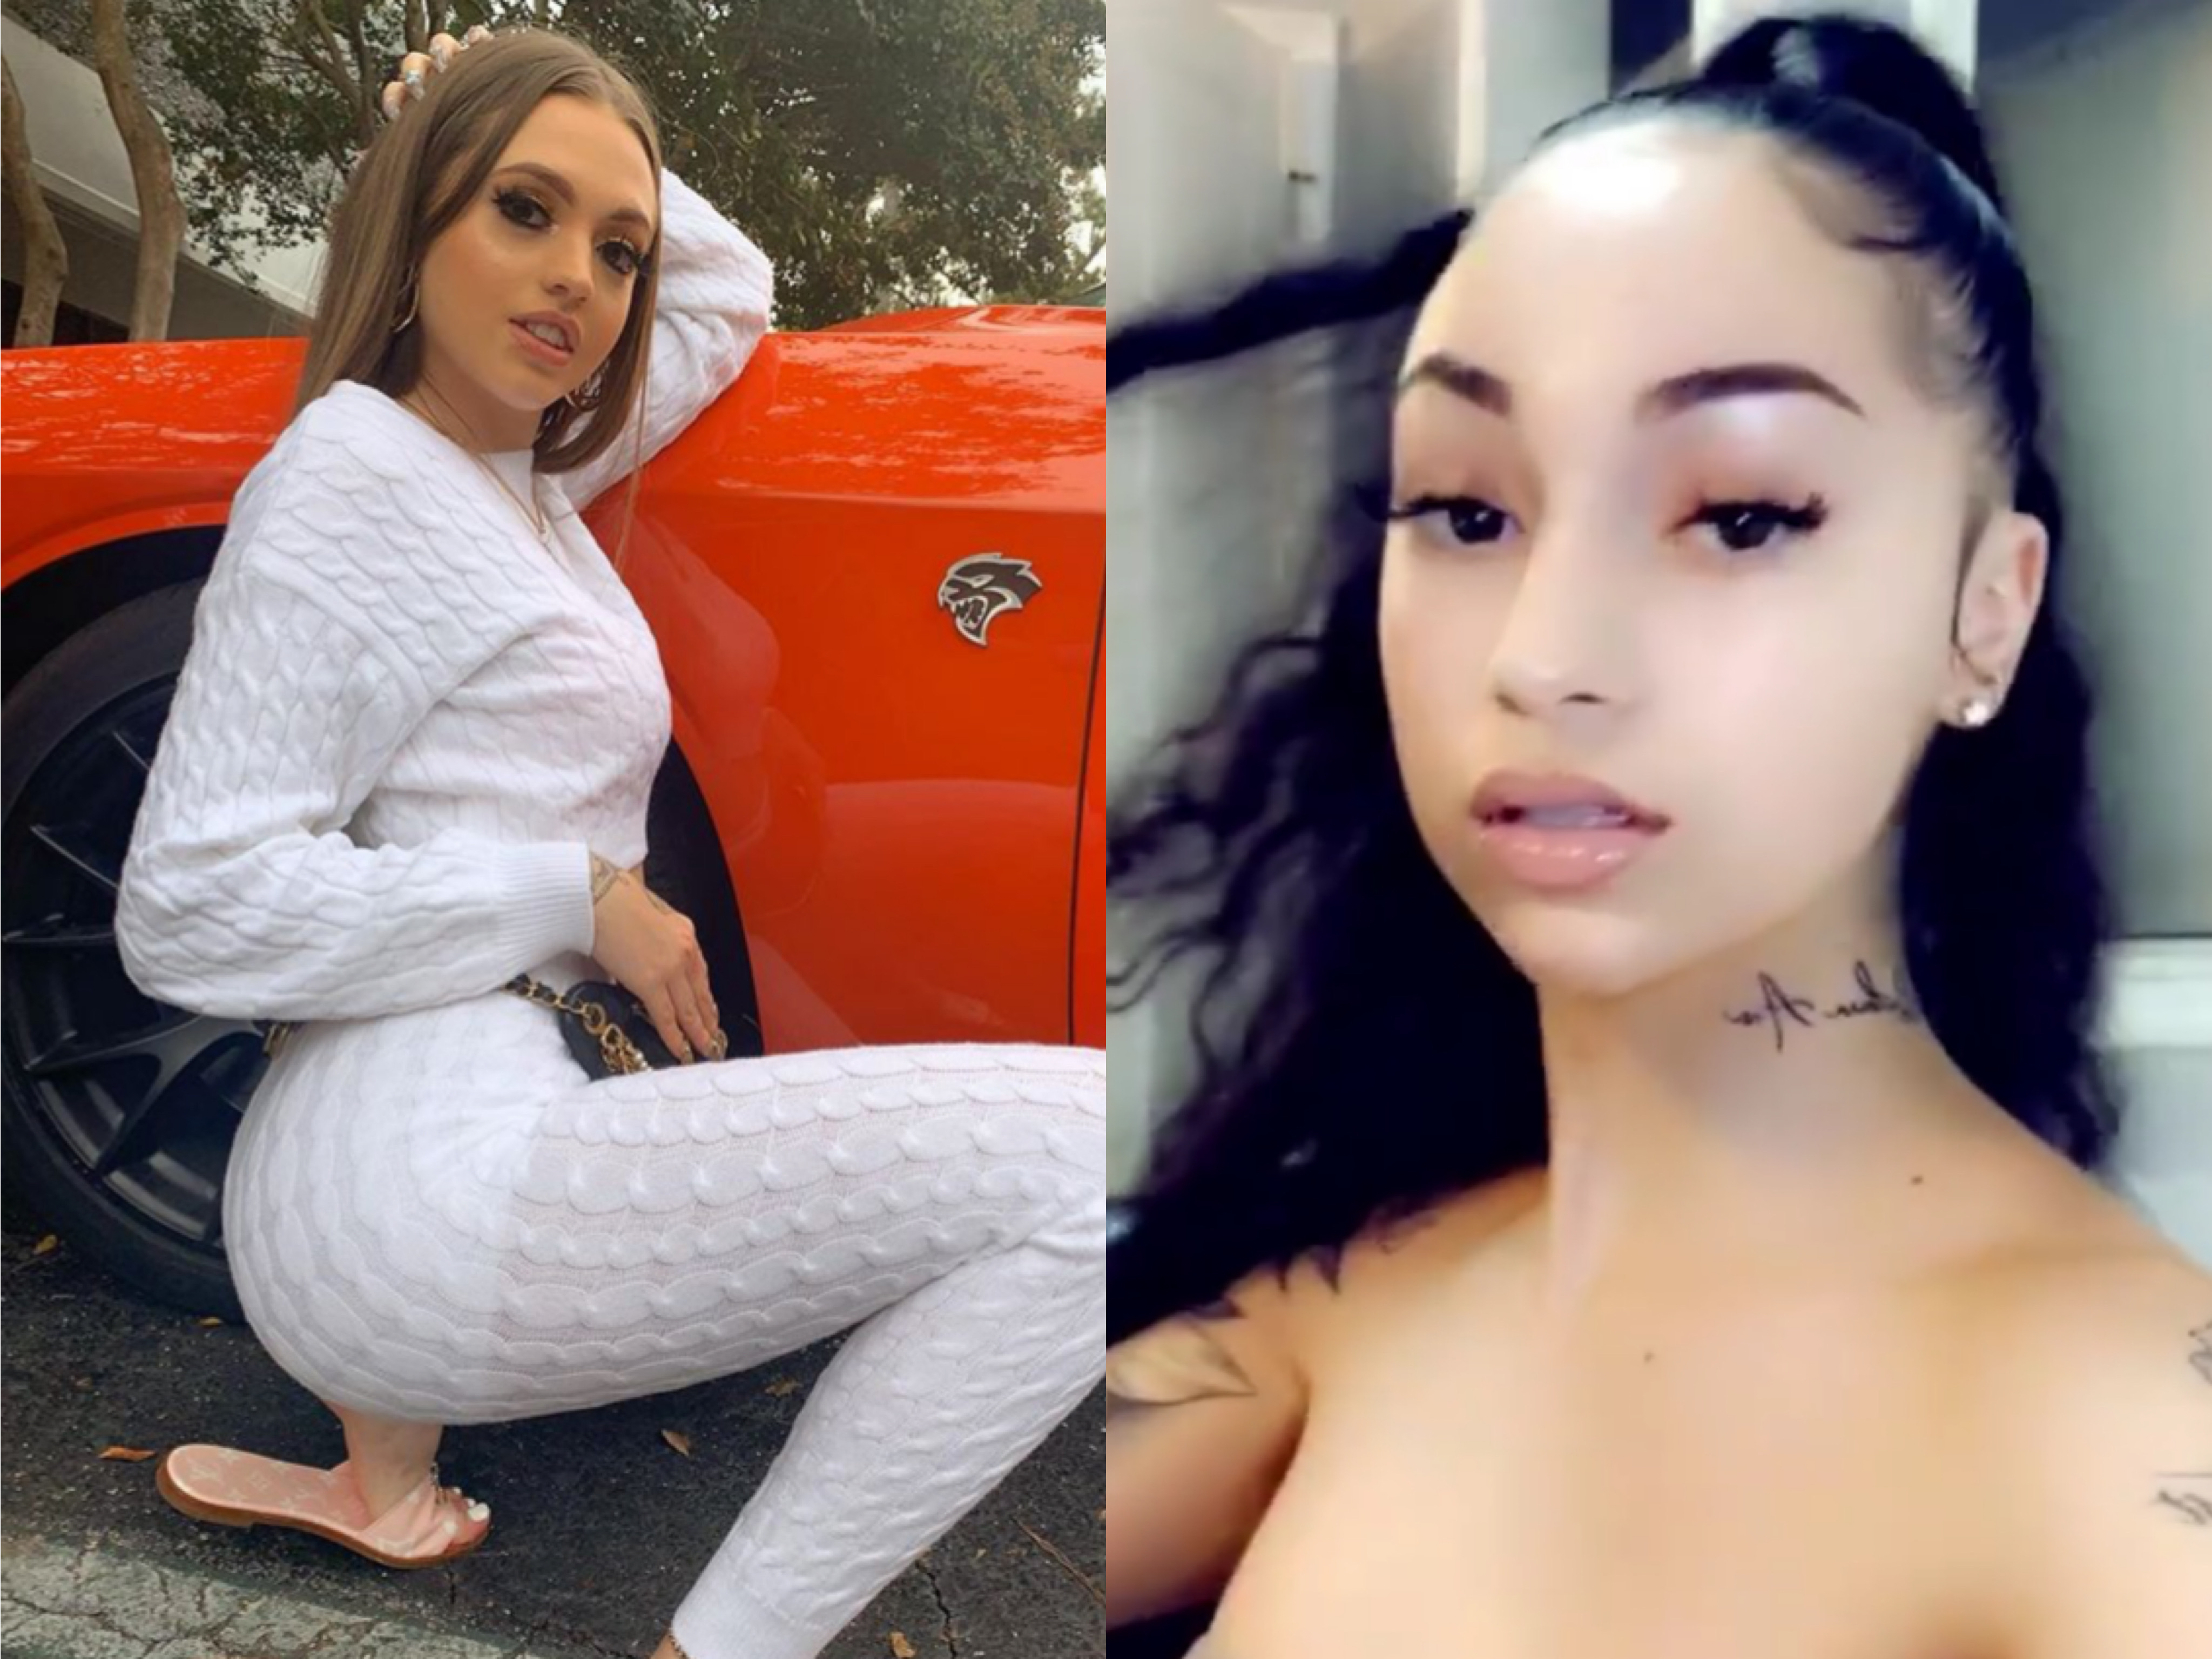 Bad bhabie onlyfans review